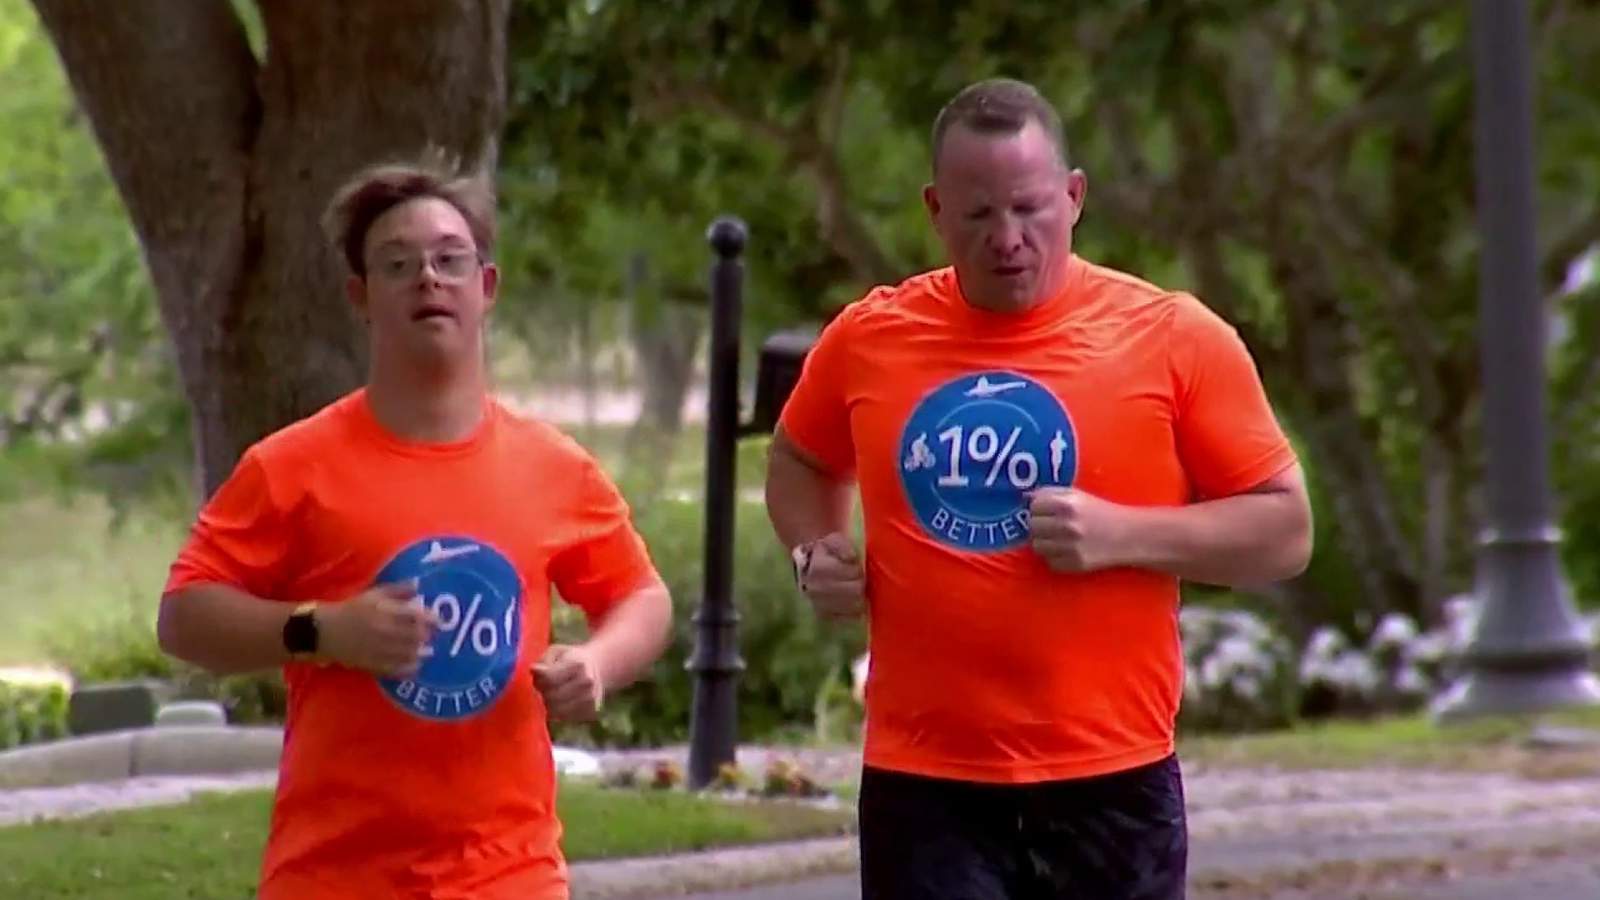 ‘One step closer to his dream:’ Maitland Ironman with Down syndrome prepares for next competition